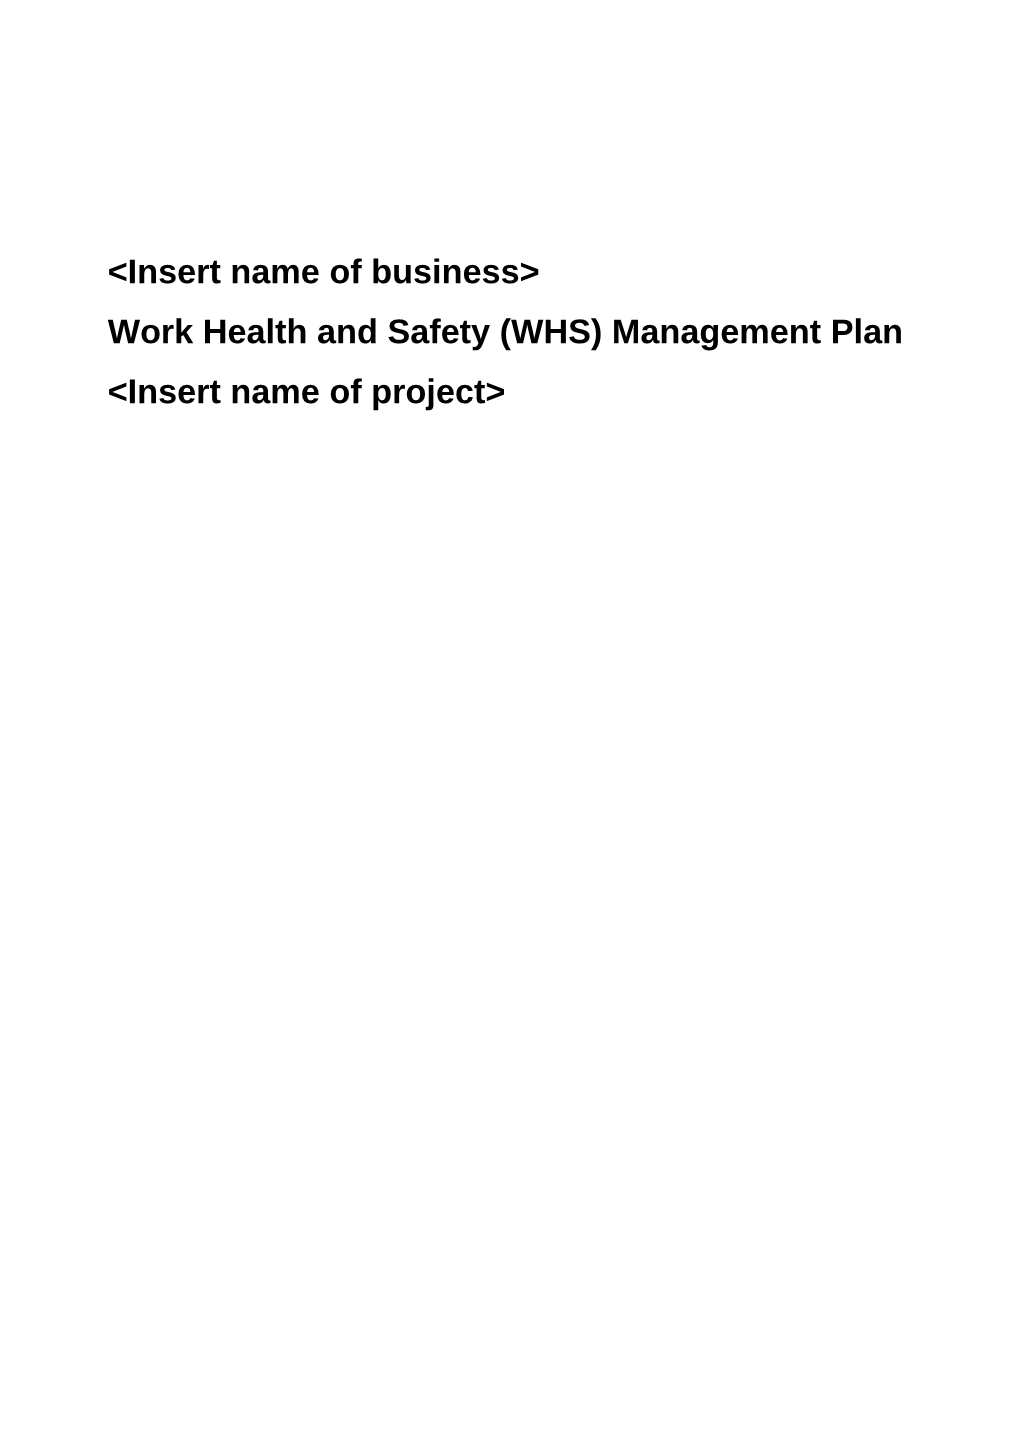 Work Health and Safety (WHS) Management Plan